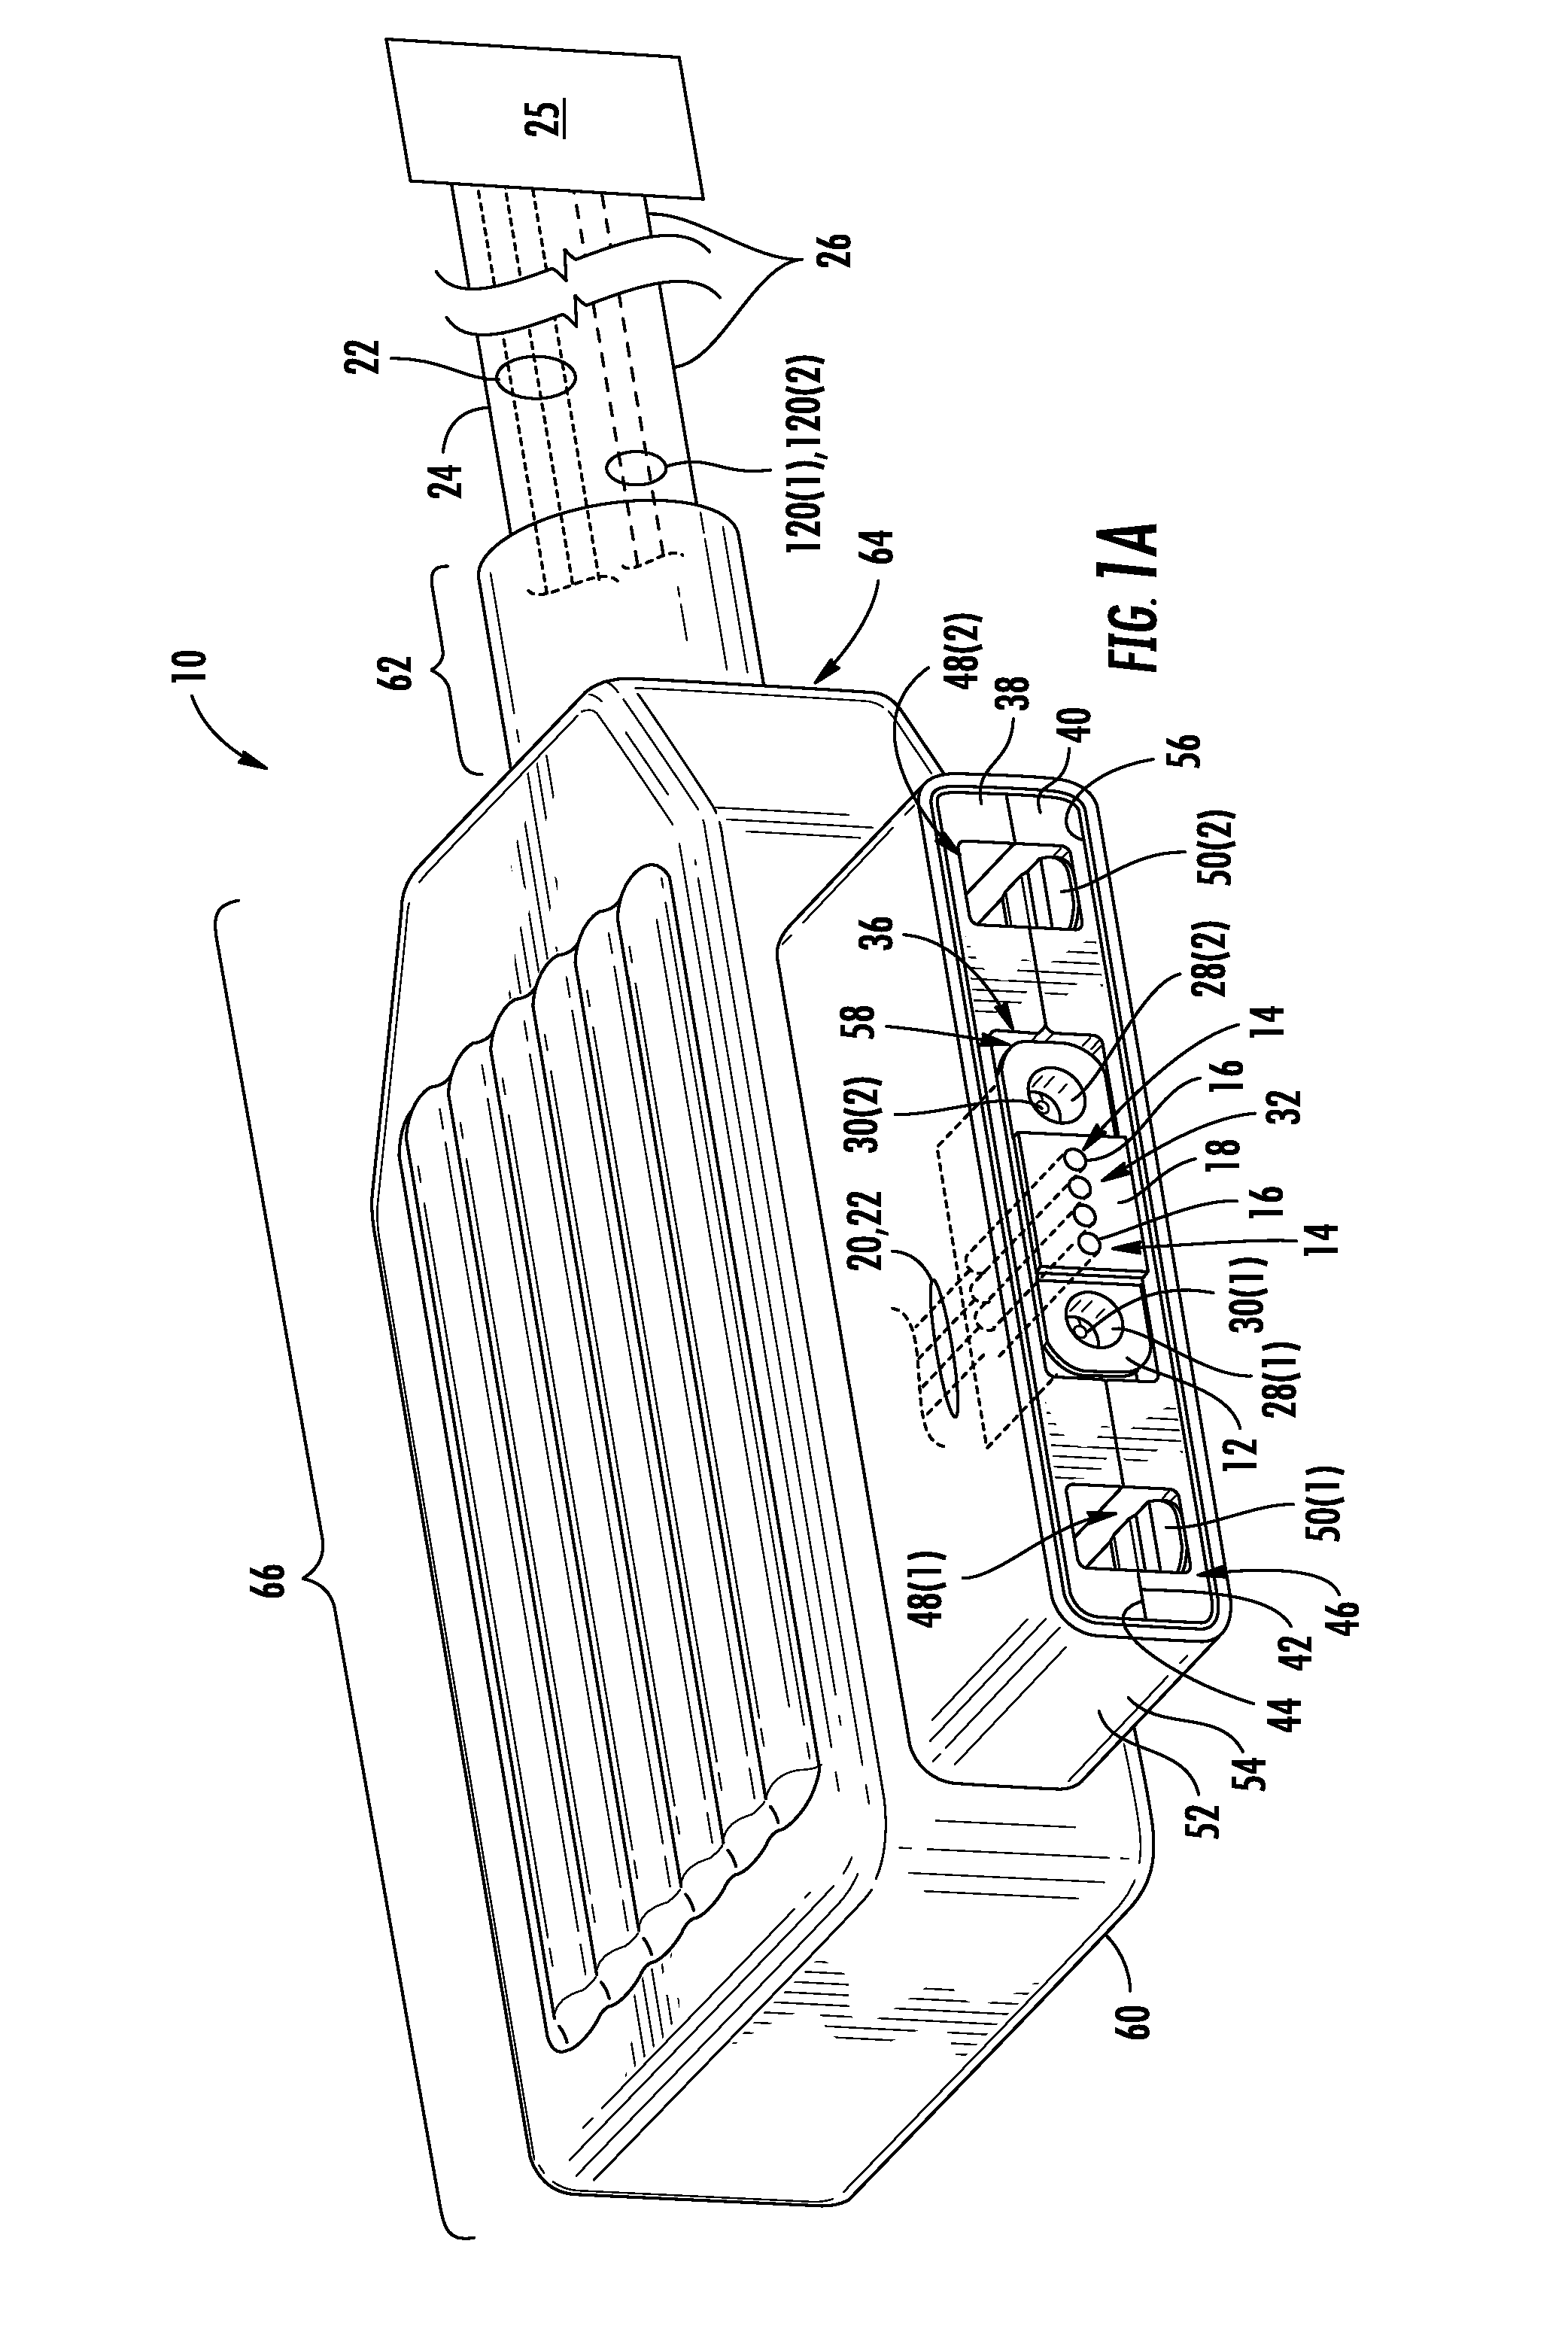 Fiber optic connectors employing moveable optical interfaces with fiber protection features and related components and methods